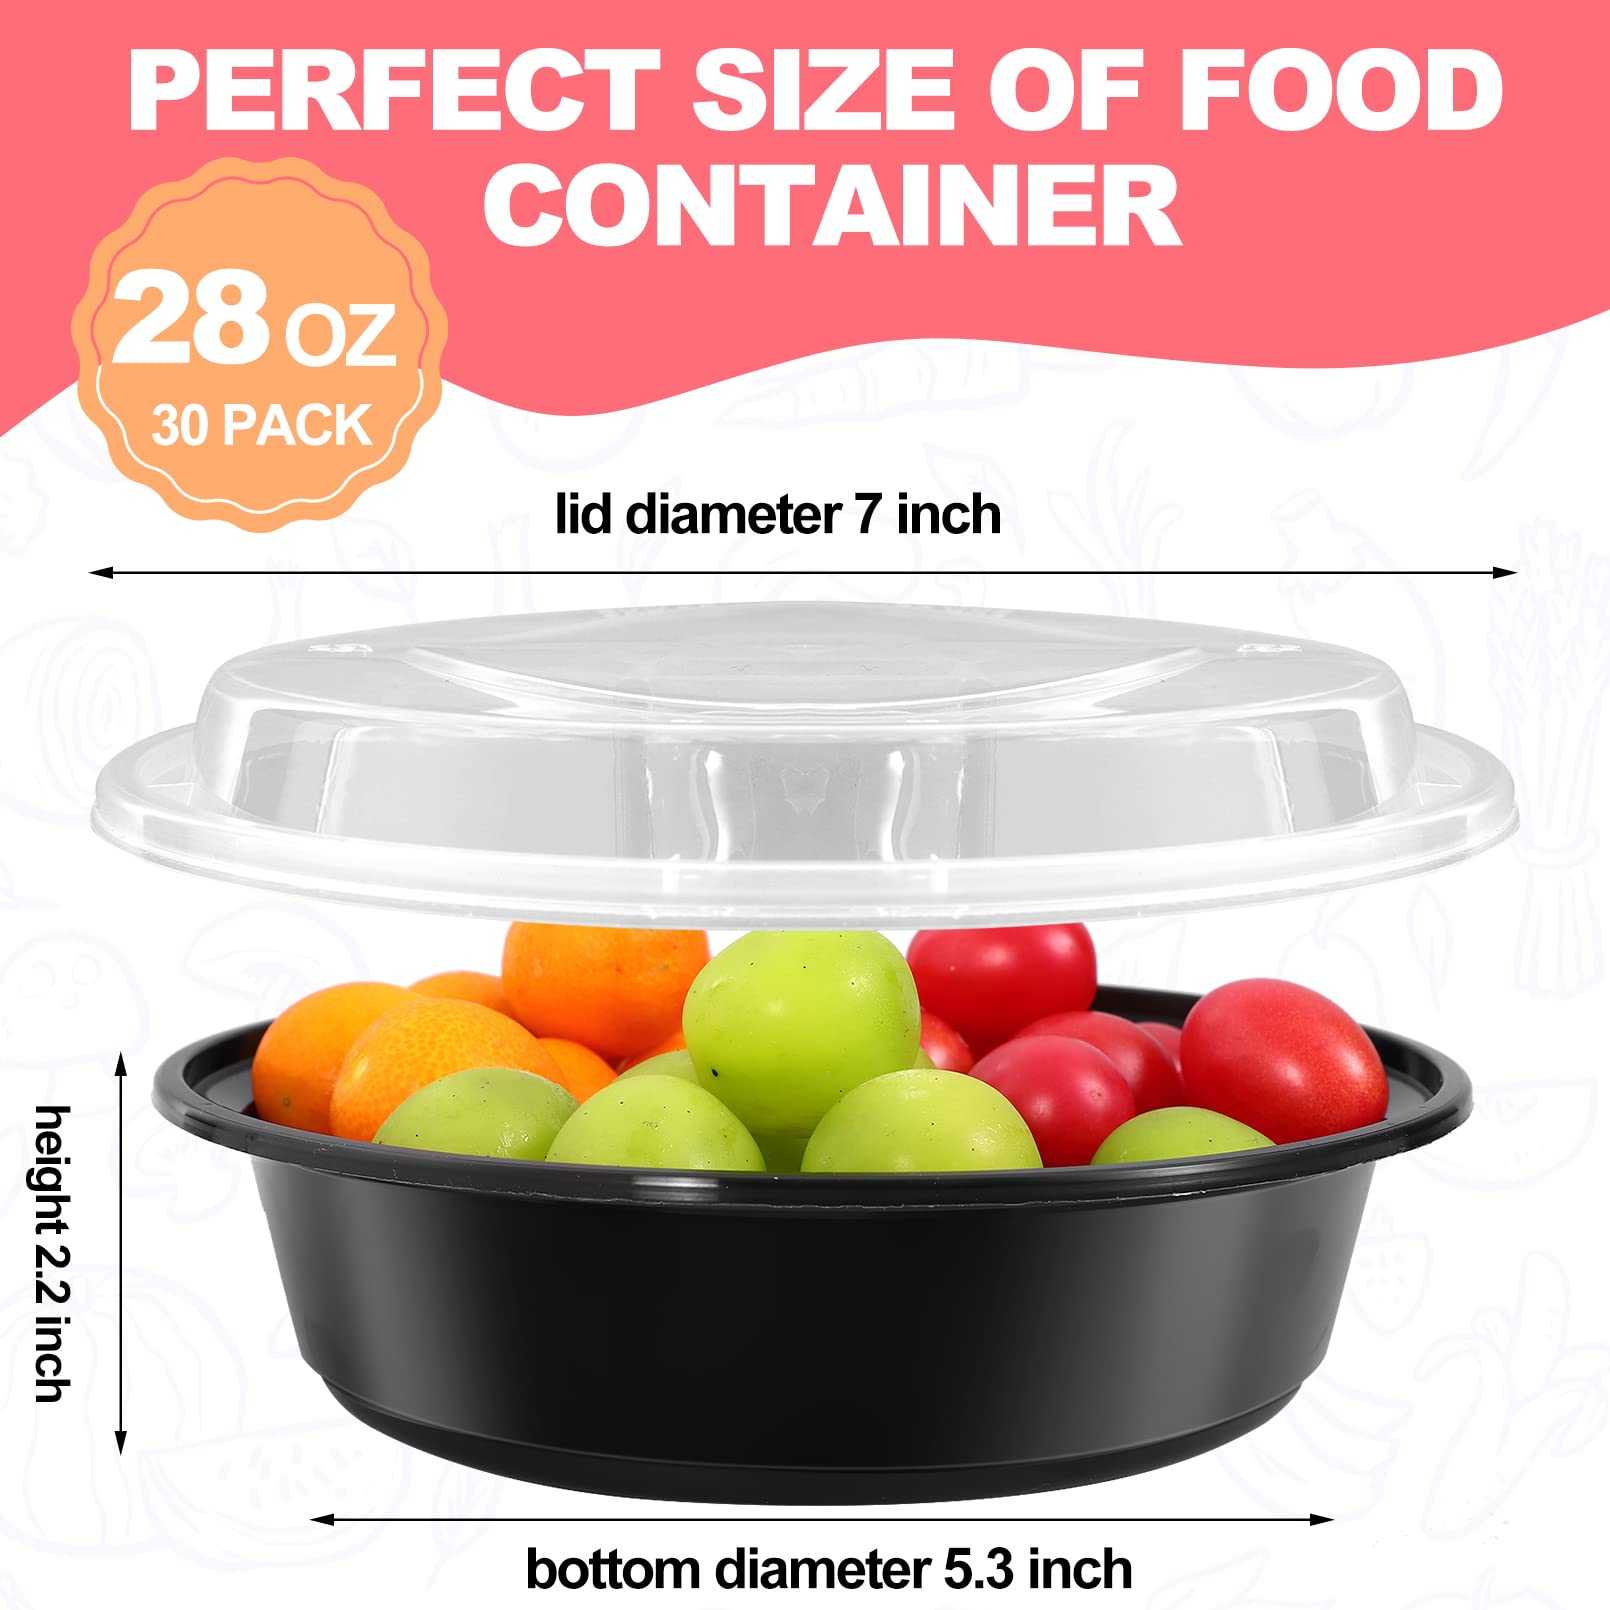 Meal Prep Container,30 Pack Food Prep Containers,28 oz Meal Prep Bowls with Lids,Reusable Food Containers with Lids,Round Plastic Lunch Containers,BPA-Free,Stackable,Microwave/Dishwasher/Freezer Safe